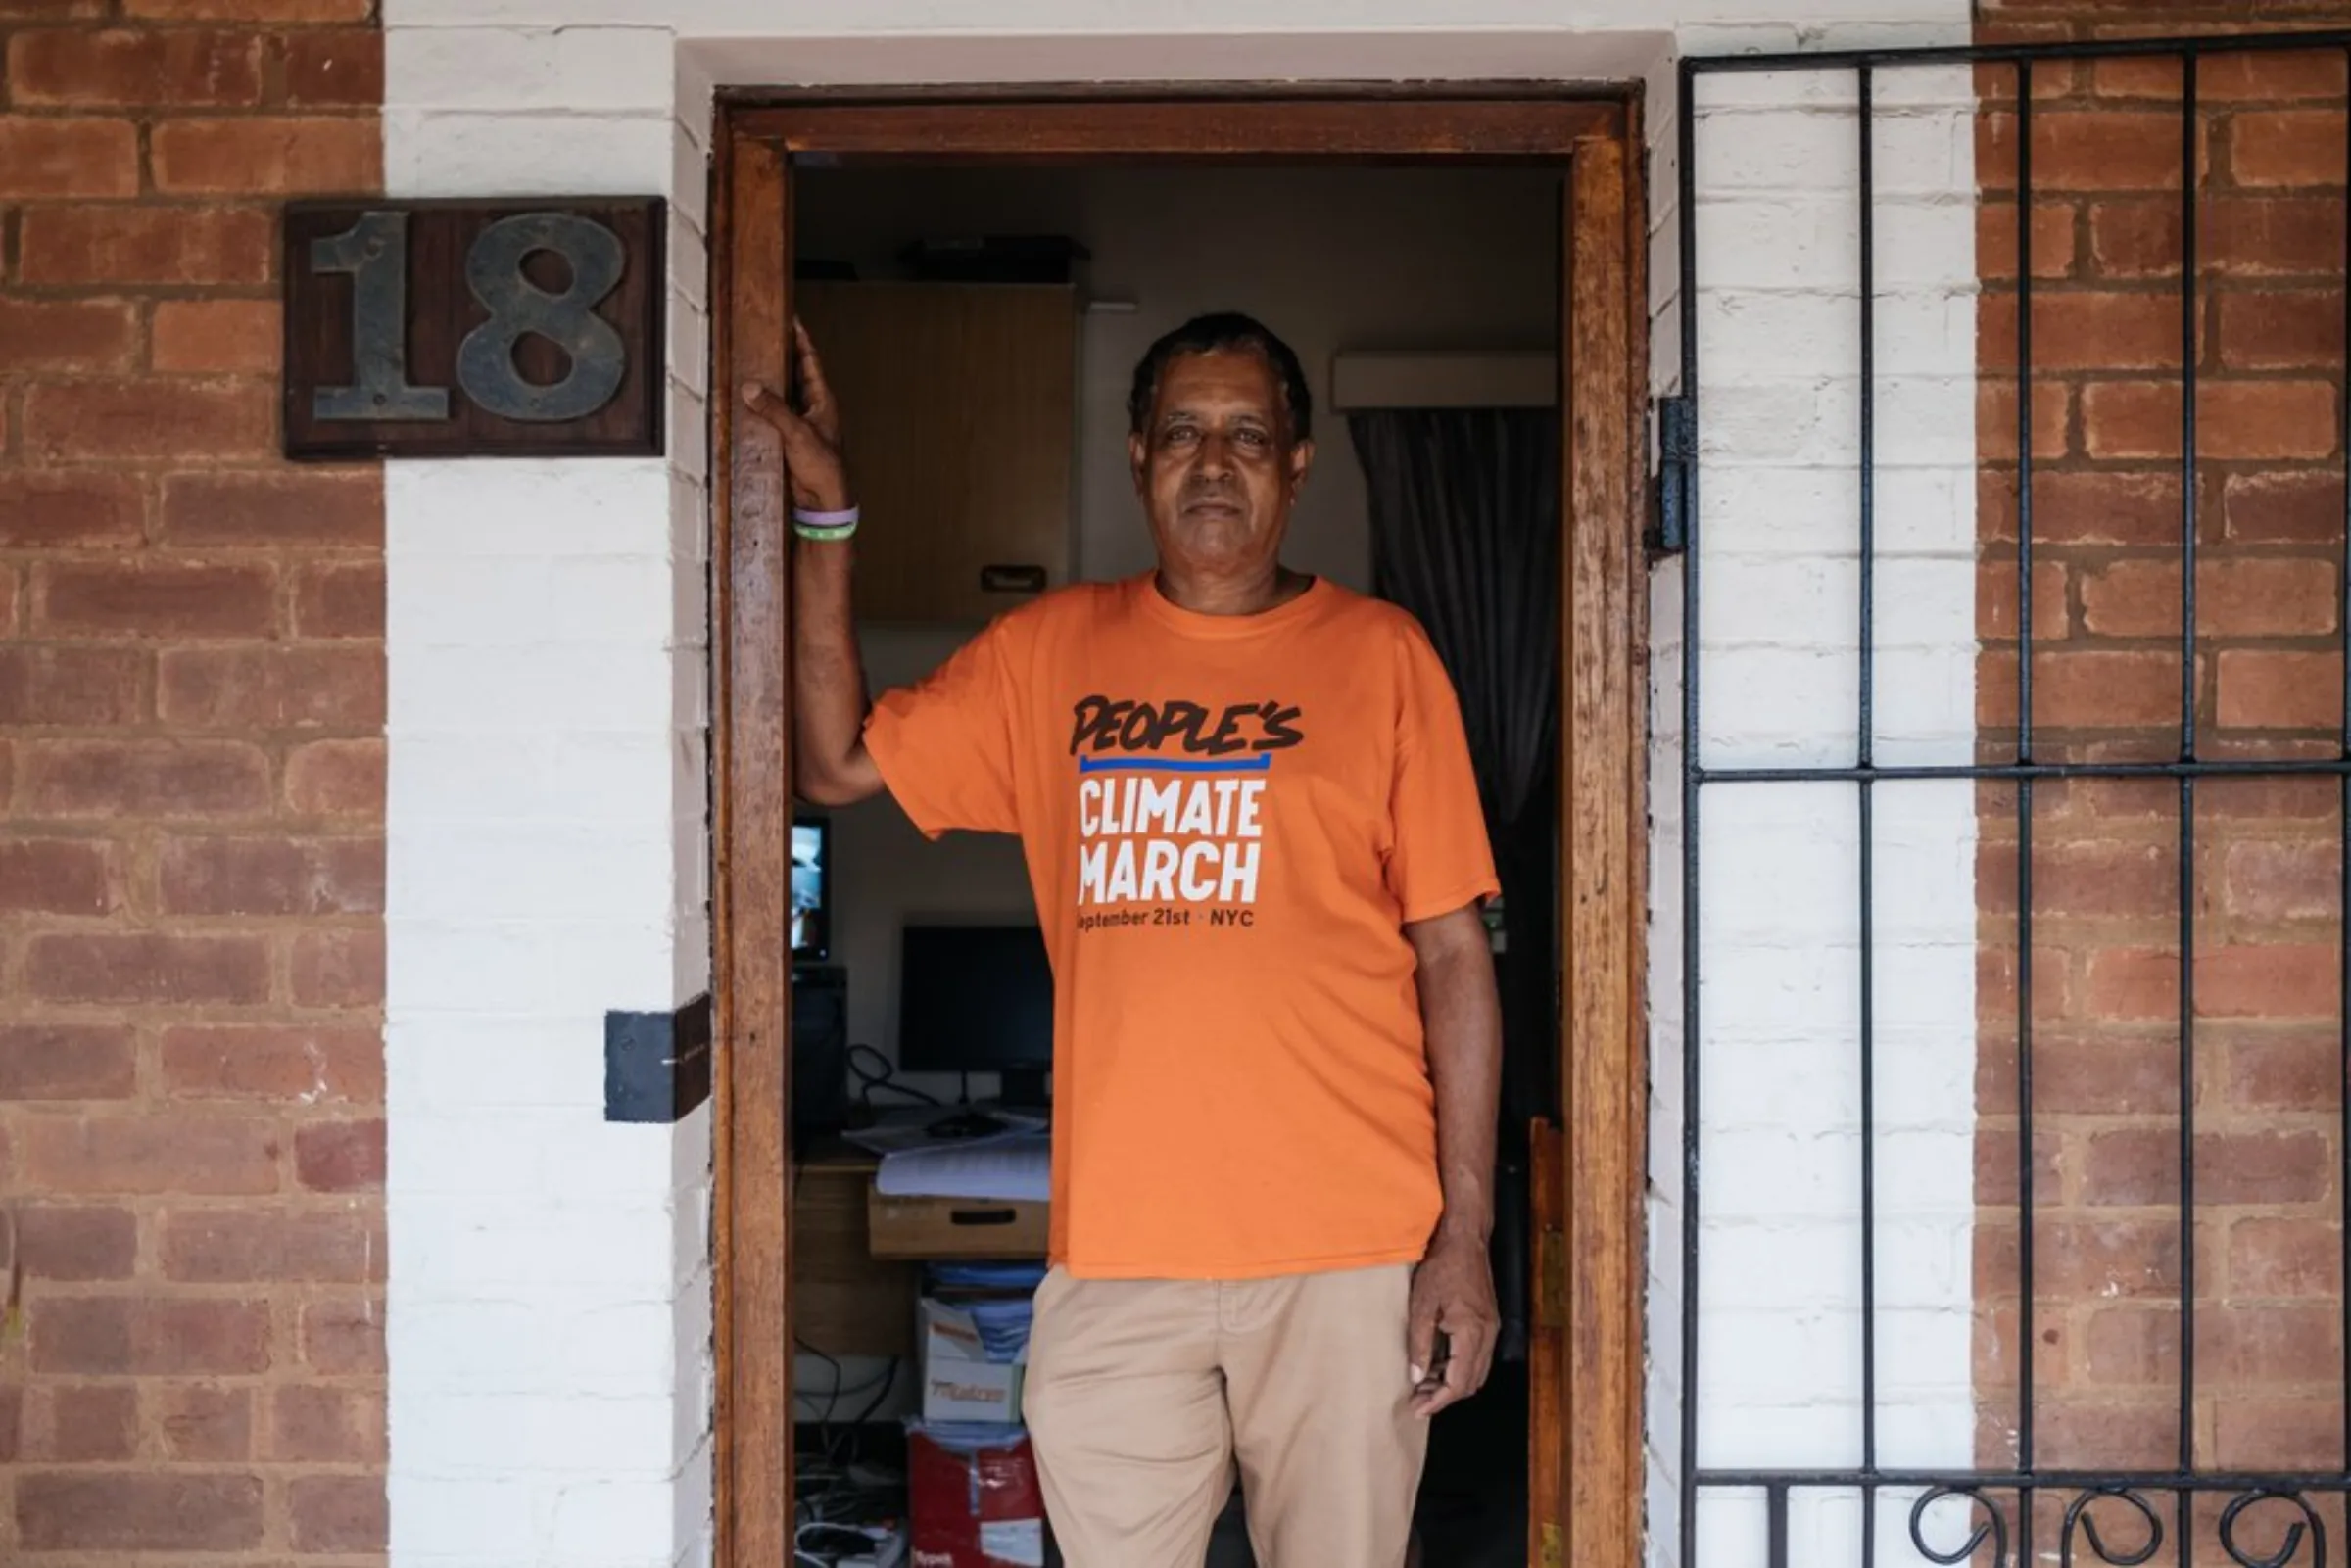 South Durban Community Environmental Alliance (SDCEA) co-ordinator Desmond D'Sa stands at the door of the SDCEA office in south Durban, South Africa, March 29, 2021. Winner of the Goldman Environmental Prize in 2014, his activism over the last 25 years has focused on trying to ensure a healthy living environment for poor communities living in heavily industrialised south Durban